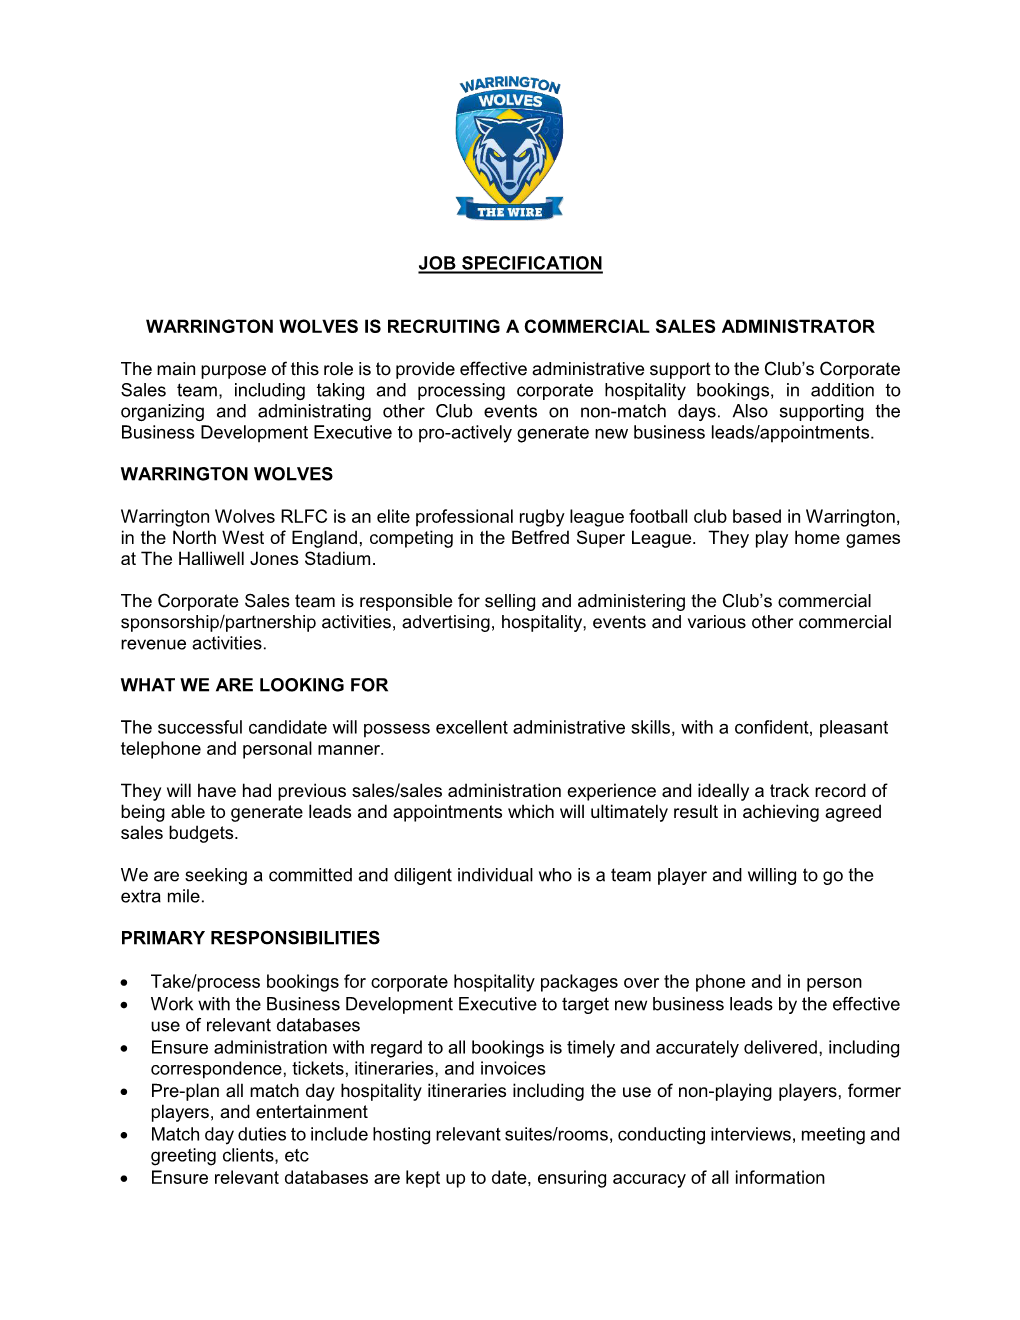 Warrington Wolves Is Recruiting a Commercial Sales Administrator